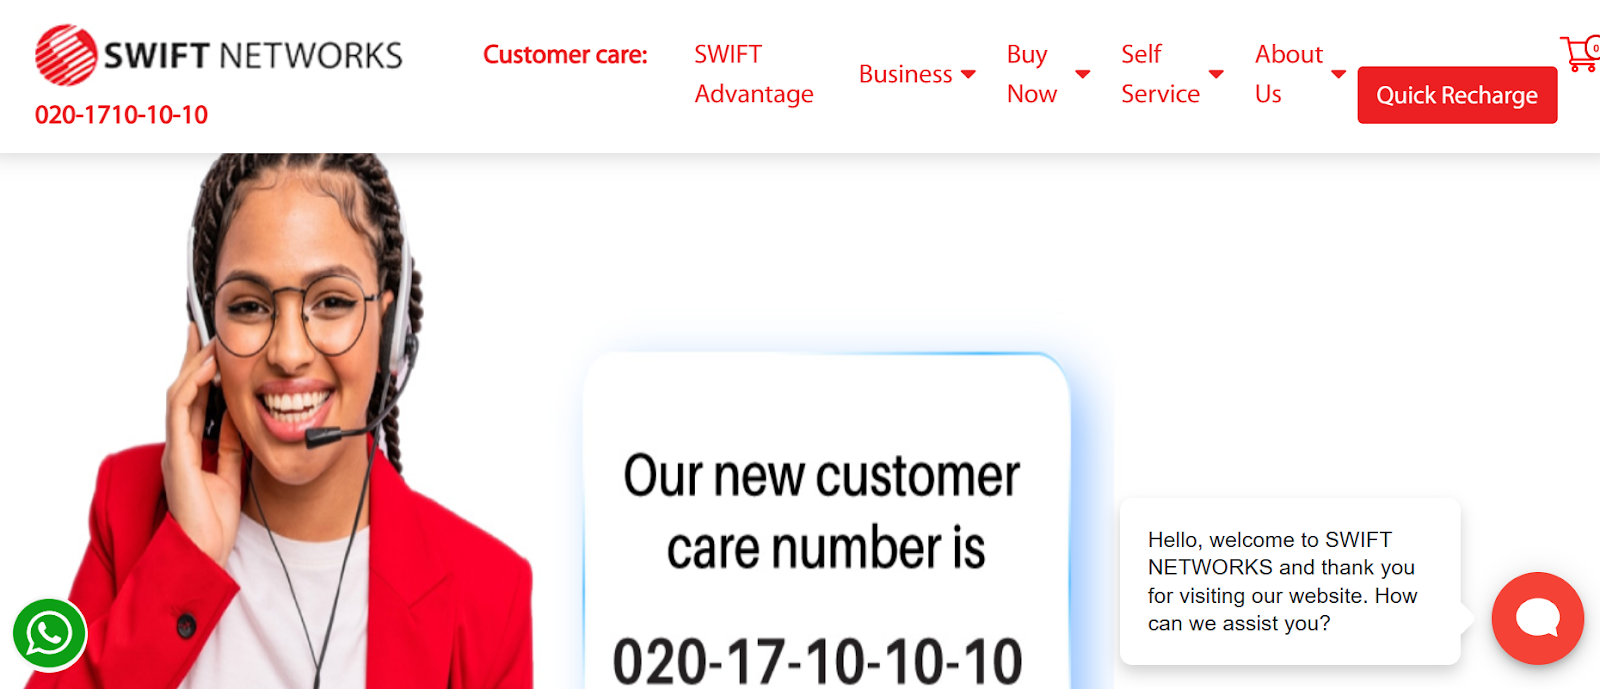 Swift Networks website snapshot highlighting the services it offers.